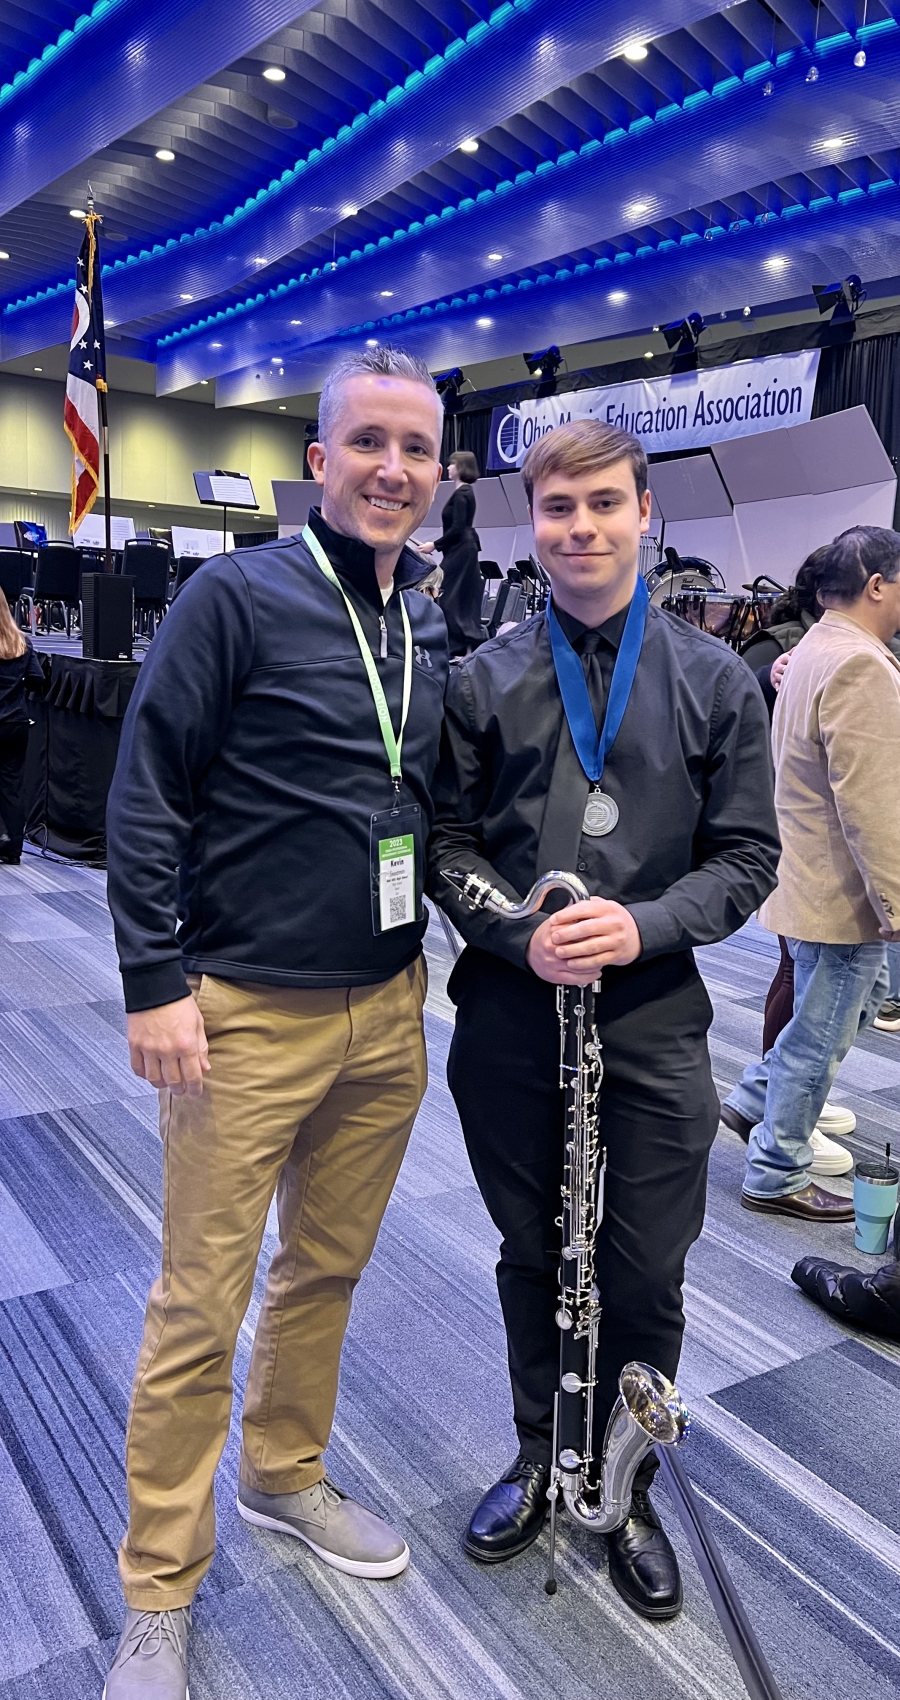 OHHS student Matthew Watson named to All-State Band